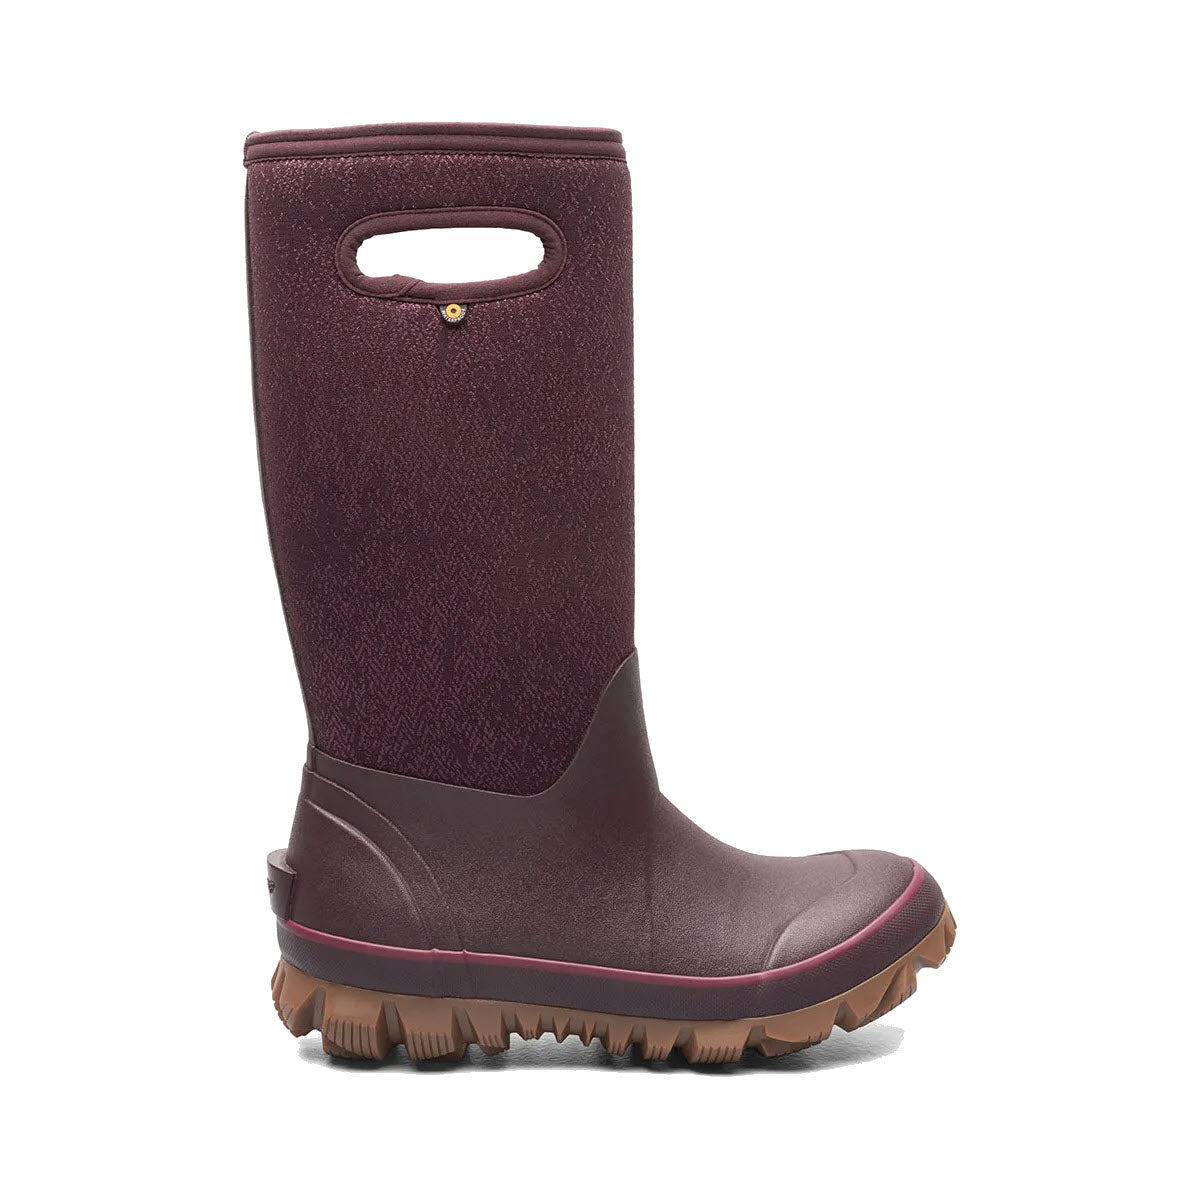 A tall maroon BOGS WHITEOUT FADED WINE - WOMENS rain boot with a textured finish, handle on the upper part, waterproof insulation, and a rugged sole.